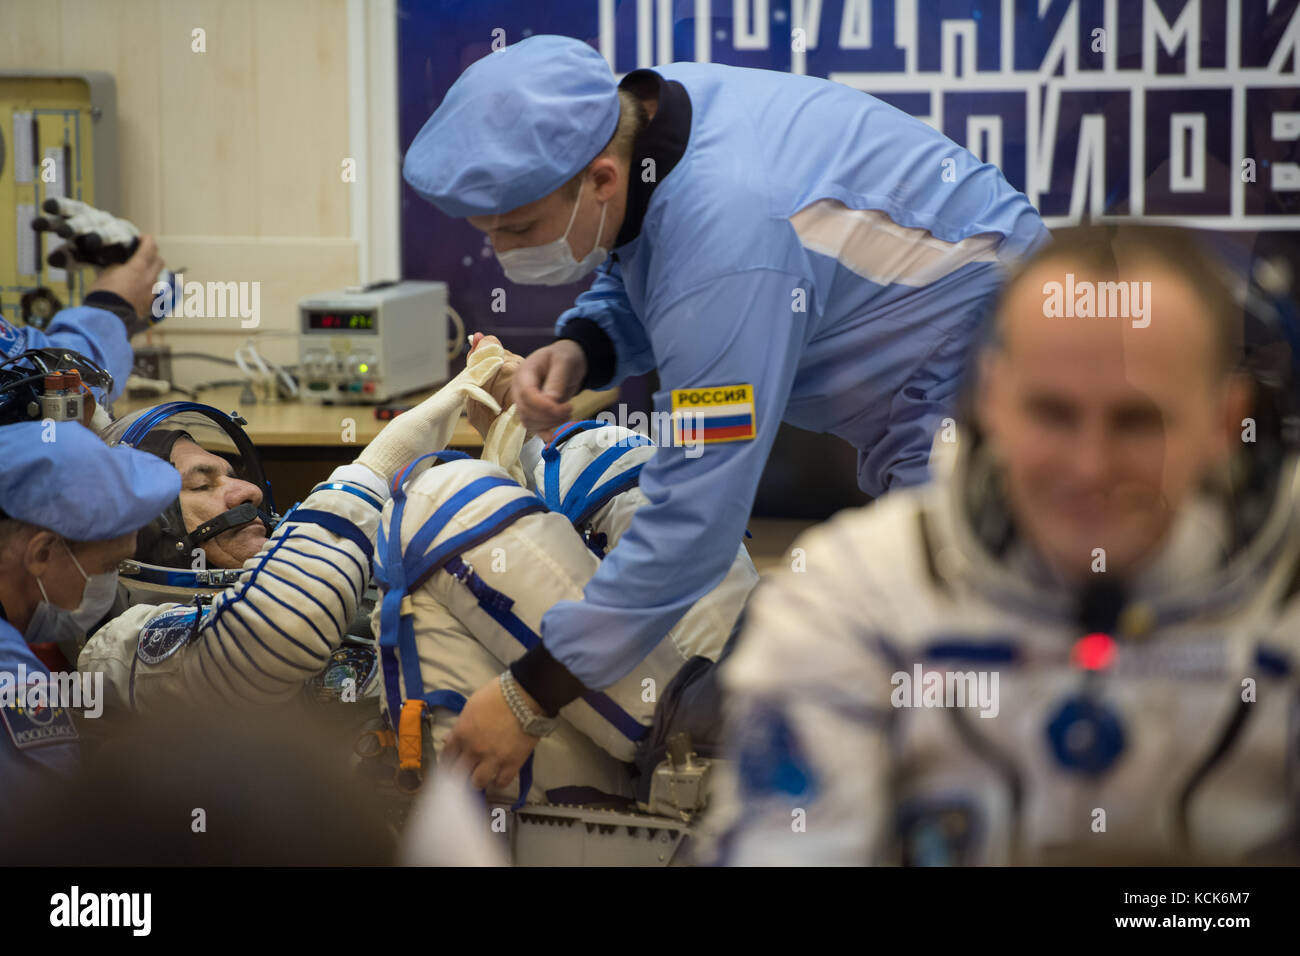 NASA International Space Station Expedition 52 prime crew member Italian astronaut Paolo Nespoli of the European Space Agency has his Sokol spacesuit pressure checked in preparation for the Soyuz MS-05 launch at the Baikonur Cosmodrome July 28, 2017 in Baikonur, Kazakhstan.  (photo by Joel Kowsky  via Planetpix) Stock Photo